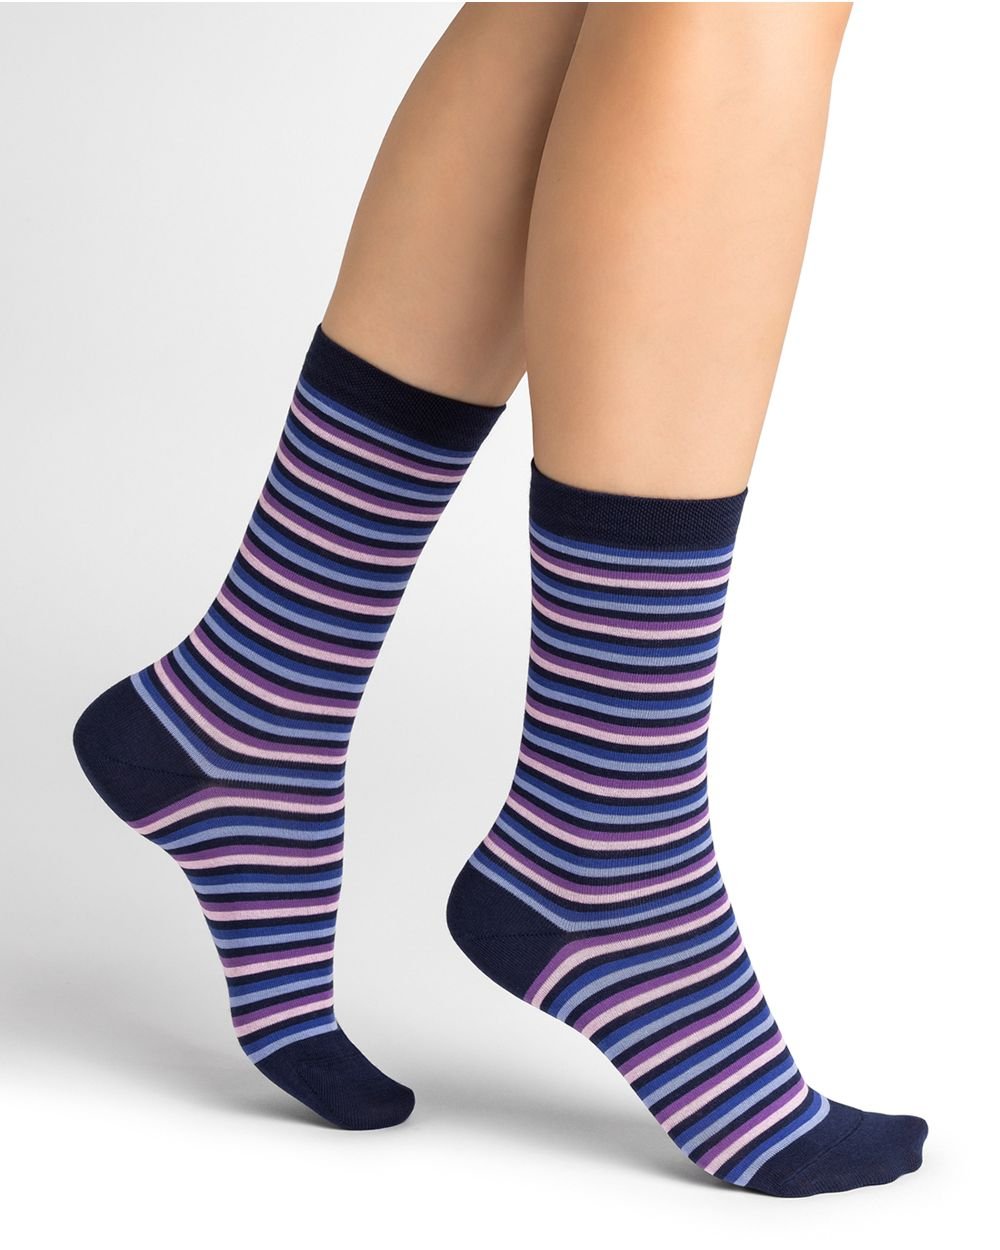 chaussettes-a-rayures.jpg